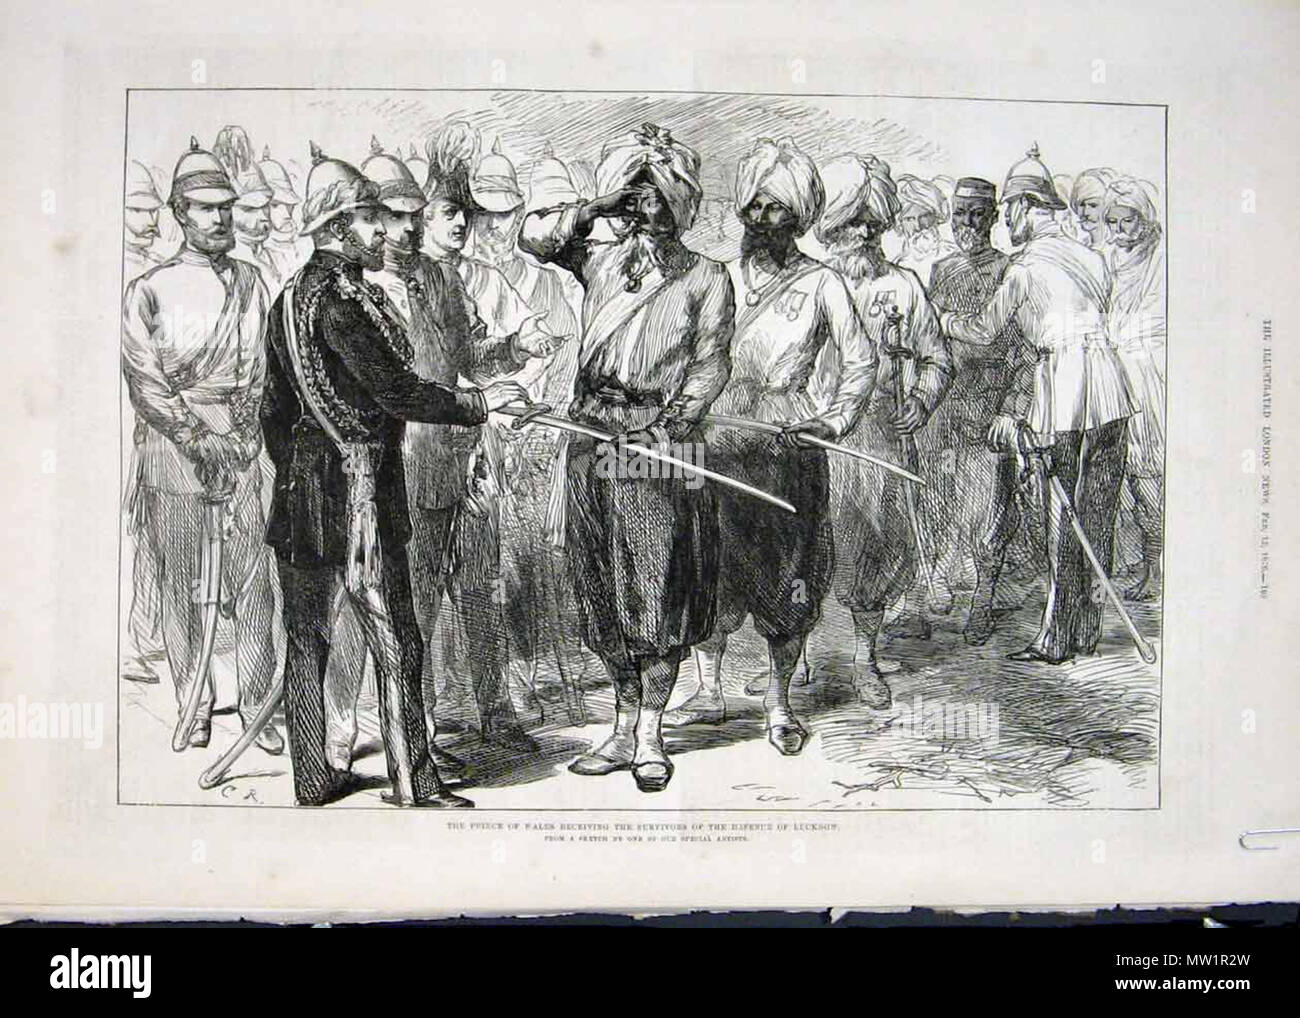 . English: The Prince of Wales honors loyal veterans of the siege of Lucknow; from the Illustrated London News, 1876 . 1876. Illustrated London News 598 The Prince of Wales - Lucknow Stock Photo